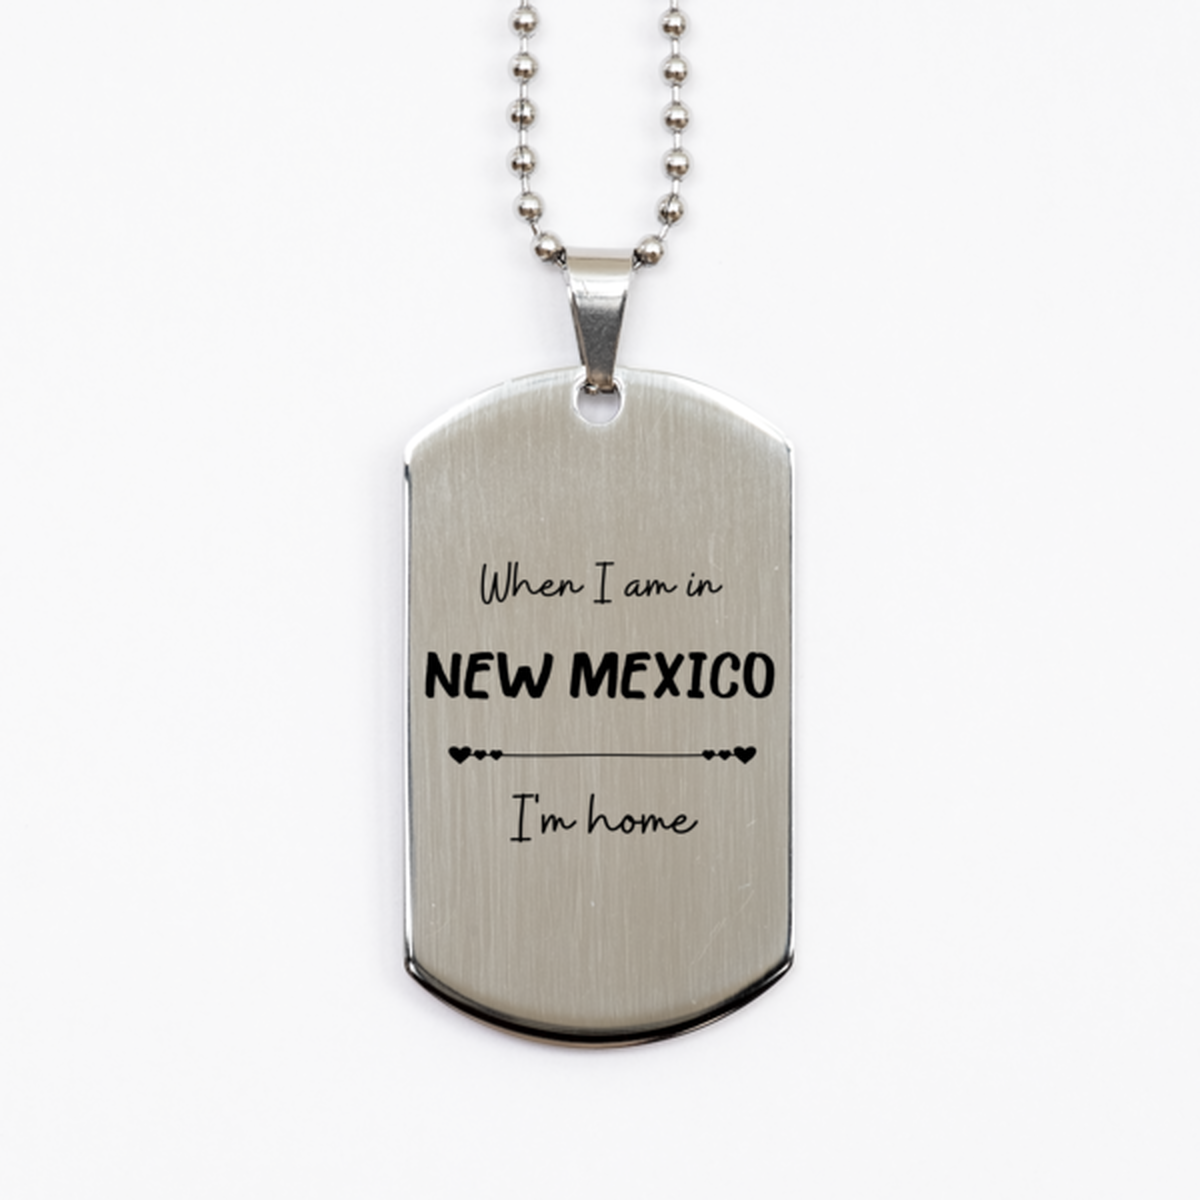 When I am in New Mexico I'm home Silver Dog Tag, Cheap Gifts For New Mexico, State New Mexico Birthday Gifts for Friends Coworker